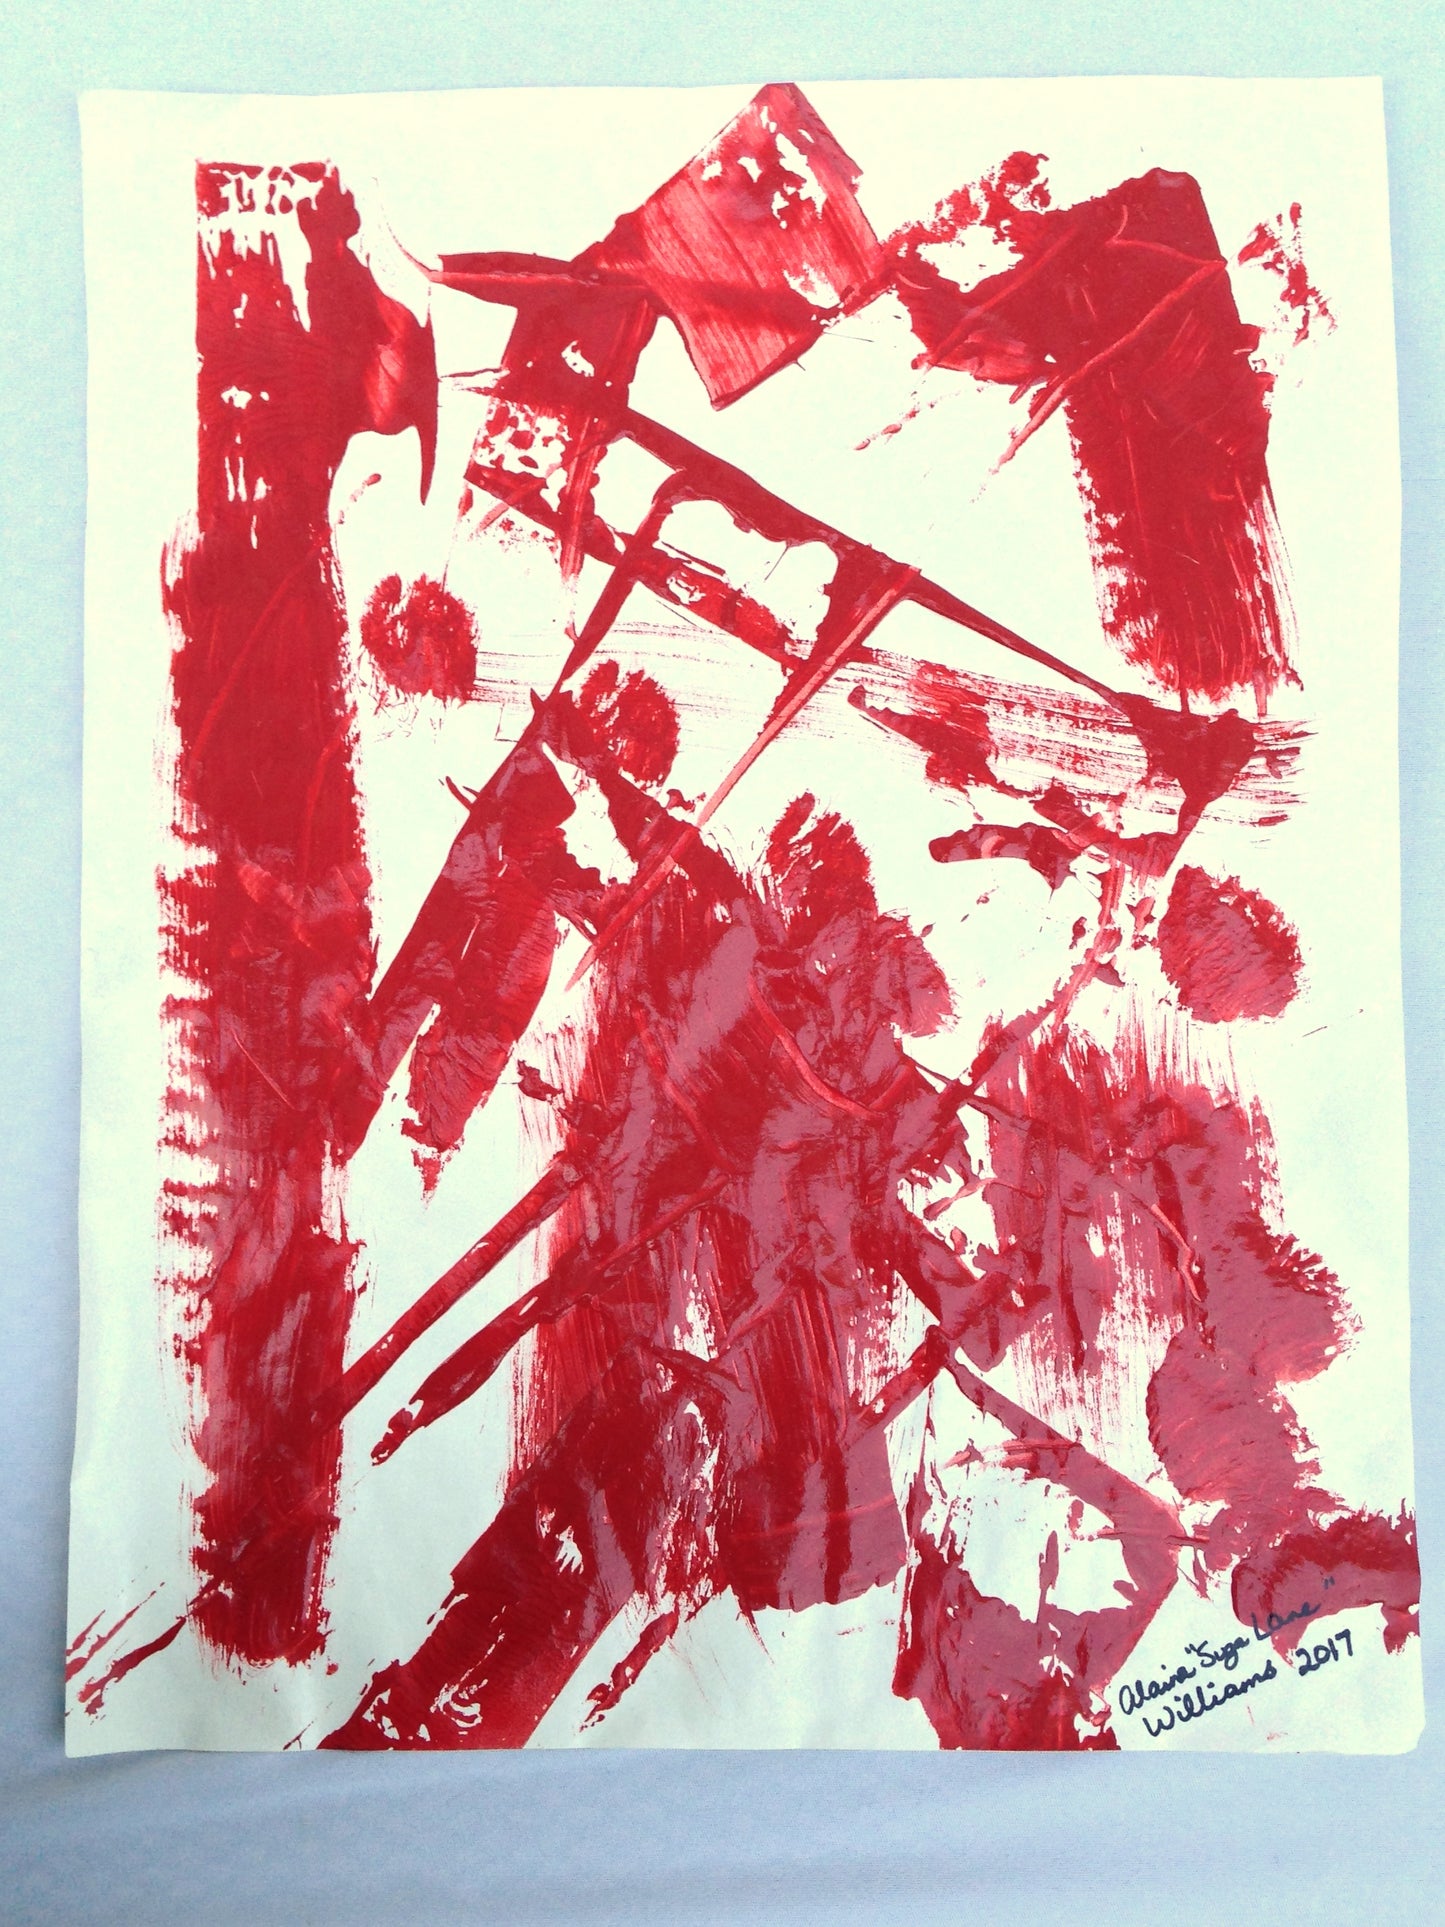 [SOLD] "Fight" Painting on Paper From Series "Fragile Existence" Suga Lane